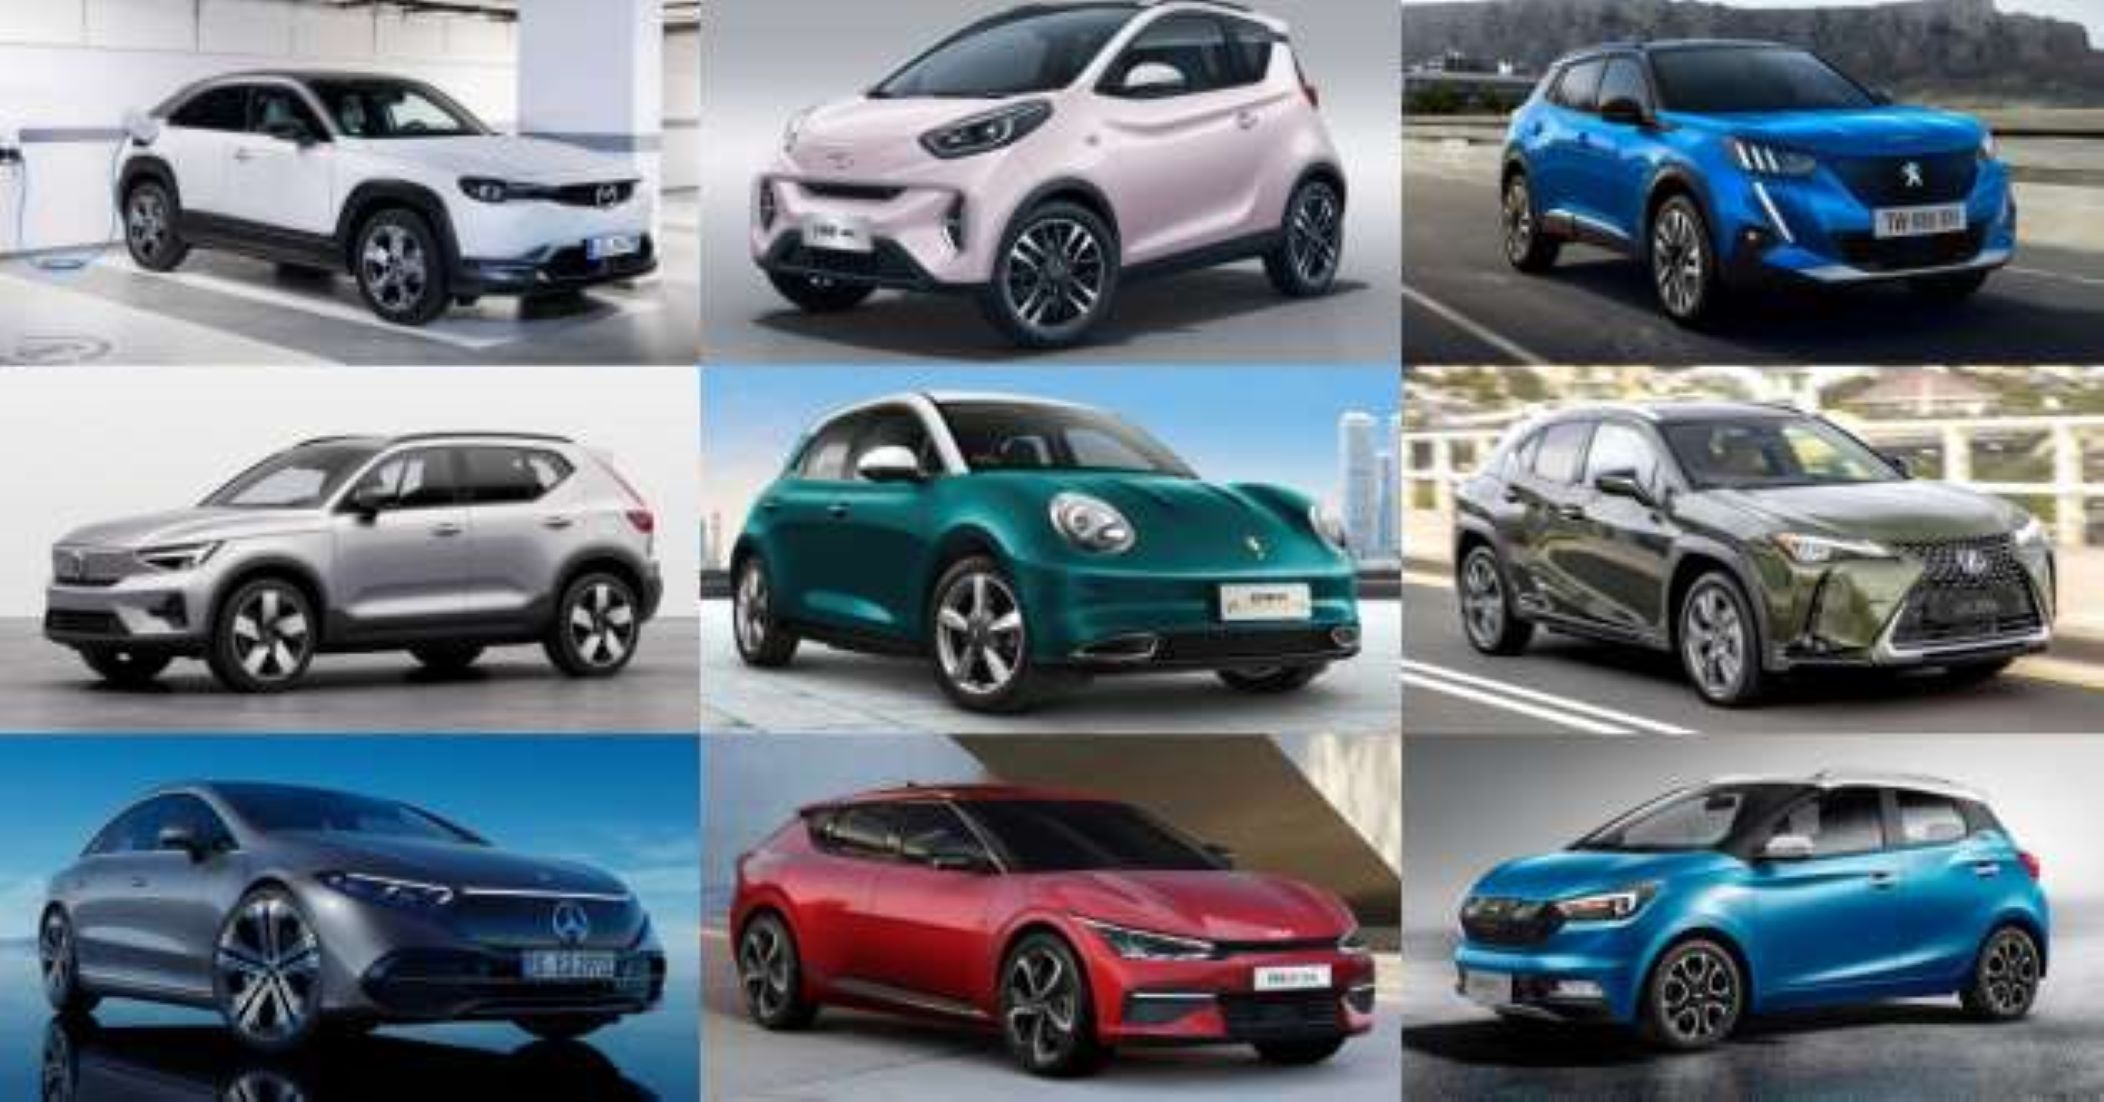 Over Half A Million Australians Plan To Buy Electric Vehicle In Next Four Years: Report